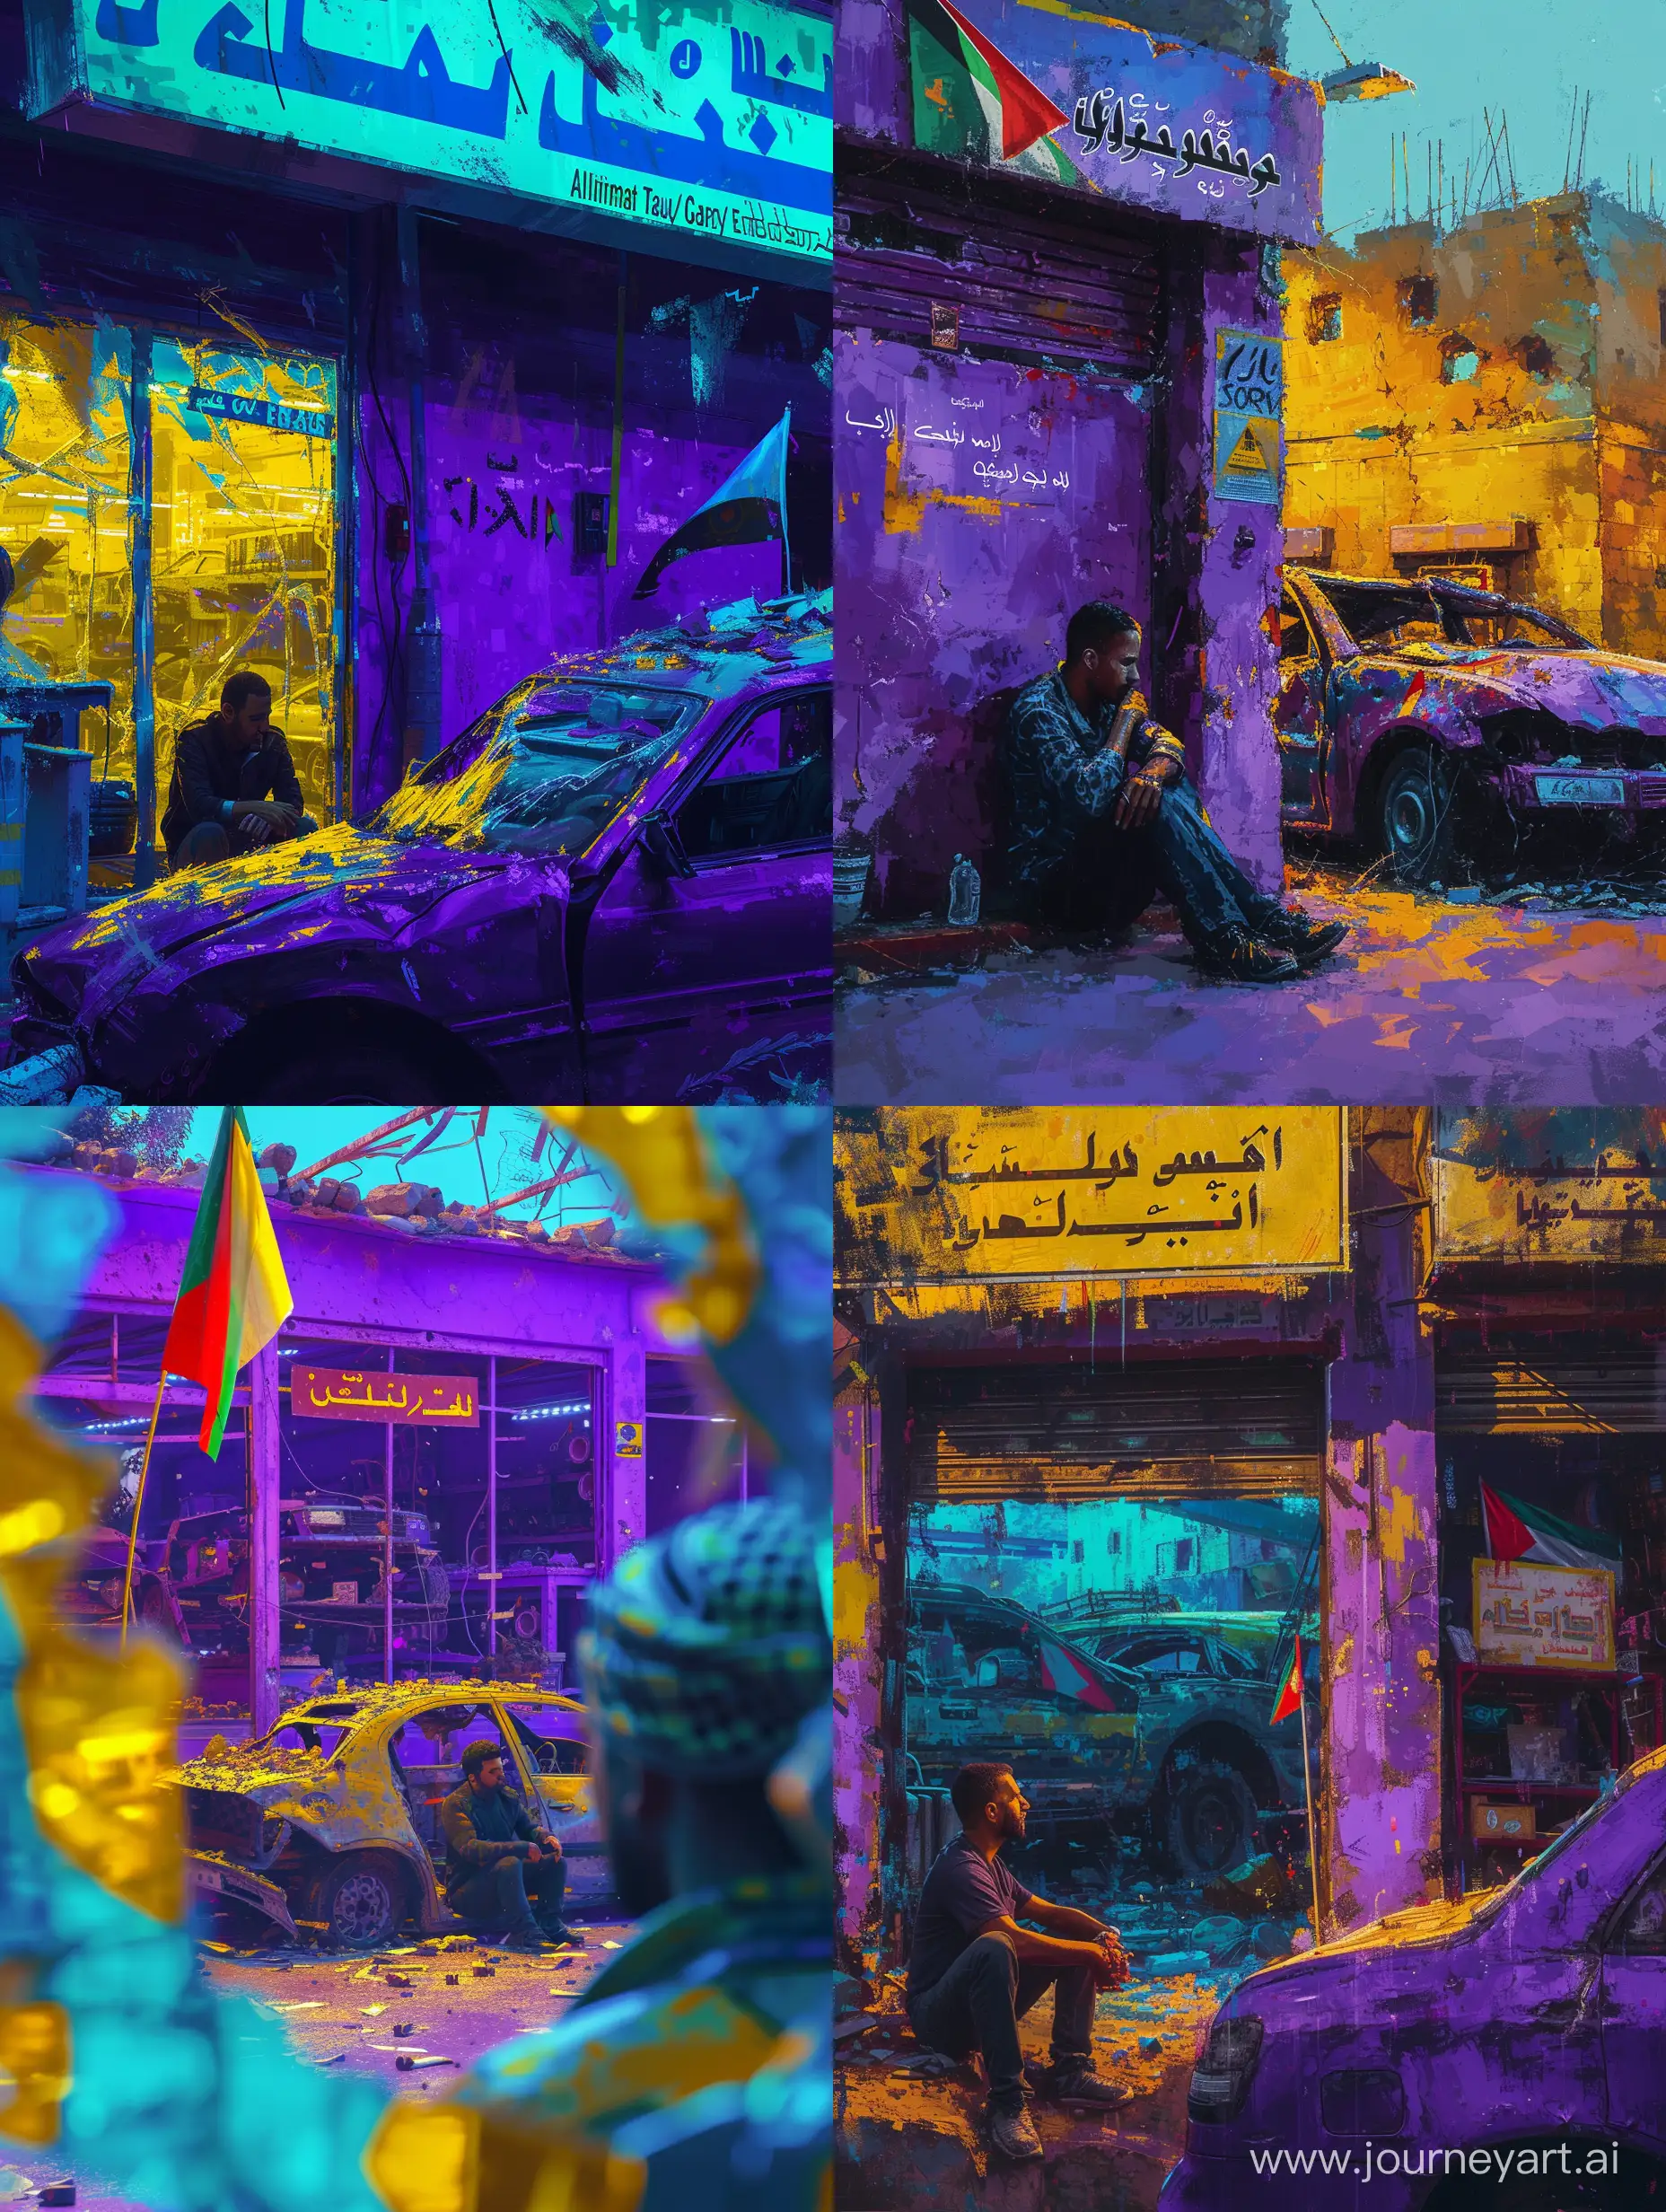 ultra realistic. close up. a Palestinian man is sitting in front of a car workshop that was destroyed by a bomb attack. workshops are purple and yellow. There is a Palestinian flag. a sign that says 'Altimat Auto Garage'. refraction of blue and yellow light. morning mood